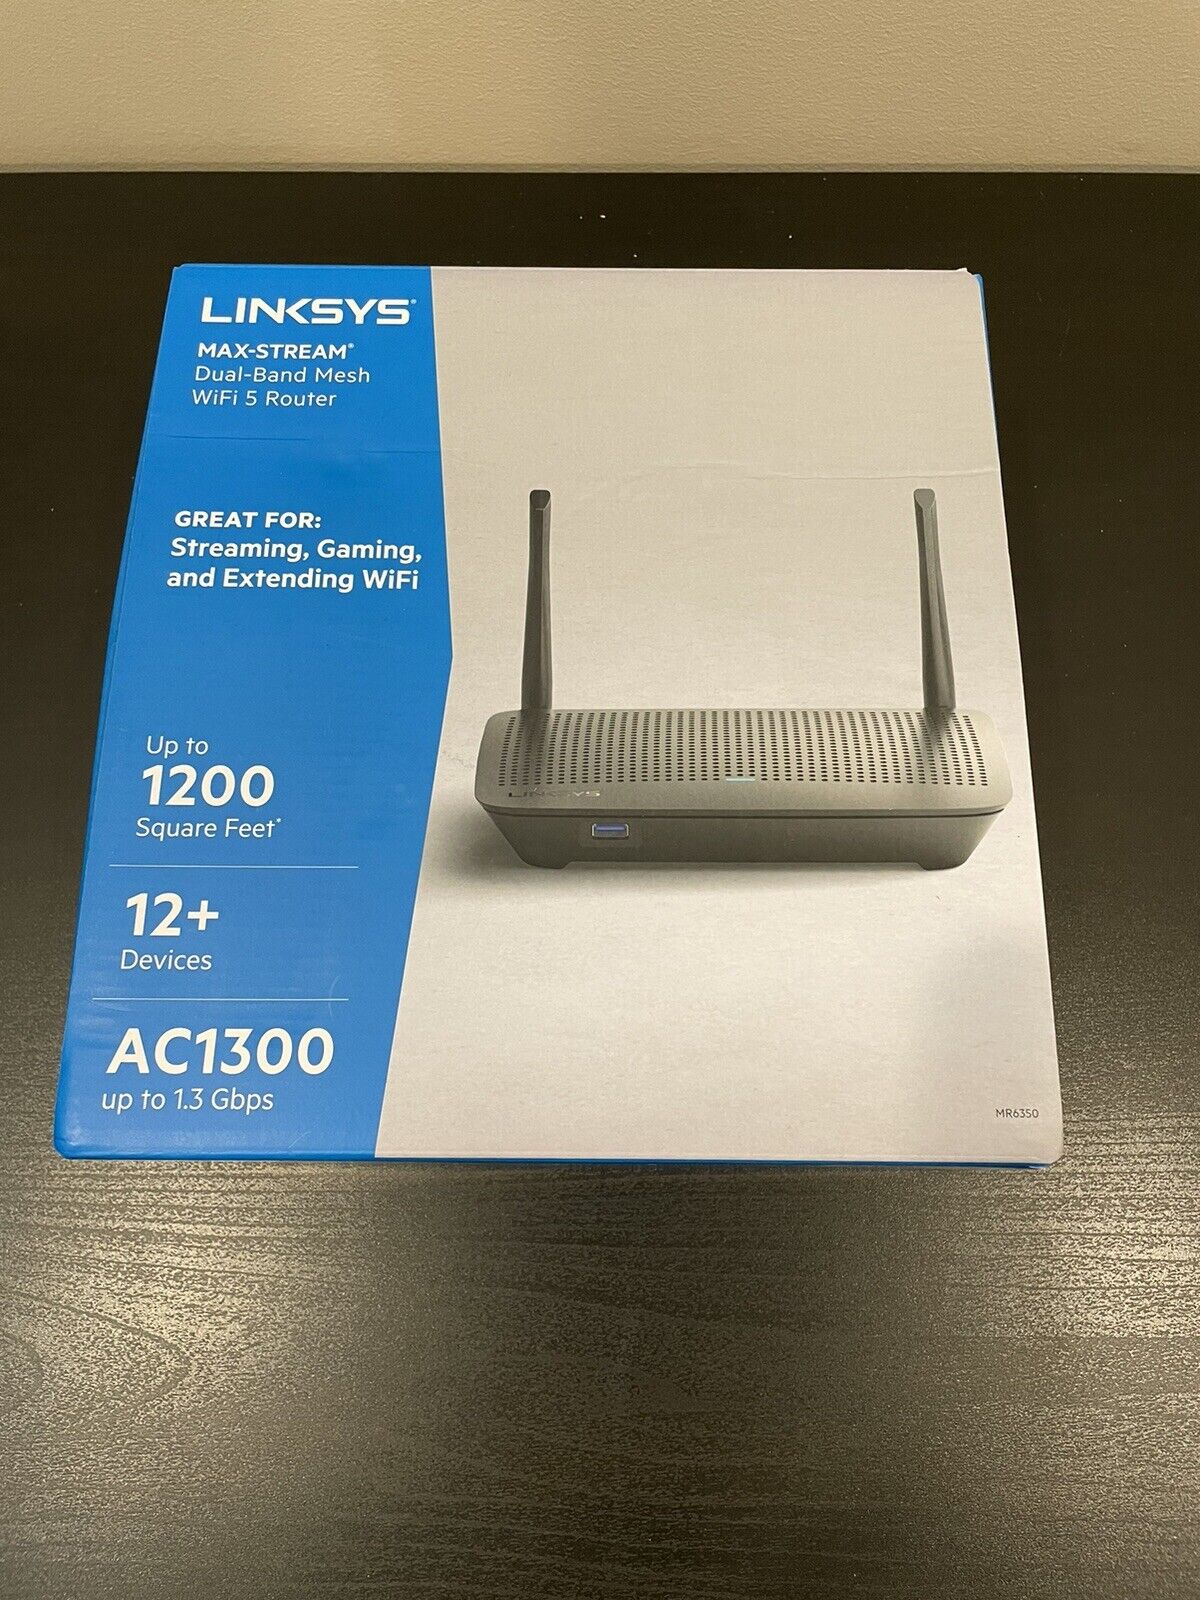 LINKSYS - Max Stream Dual Band Mesh WiFi 5 Router - Model:# MR6350 ,AC1300